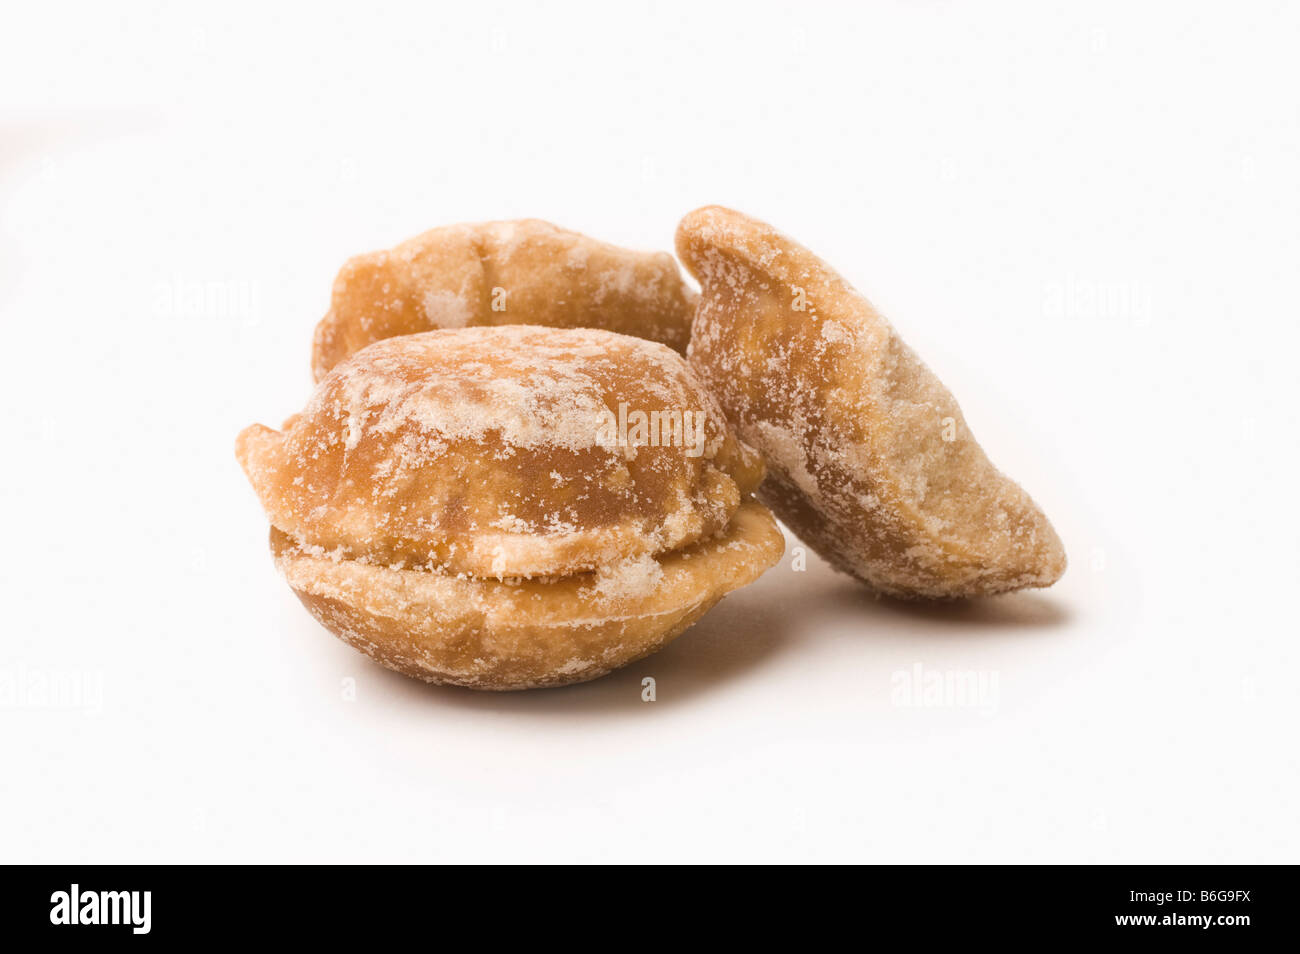 Palm Sugar Candy High Resolution Stock Photography And Images Alamy,What Is A Dogs Normal Temperature